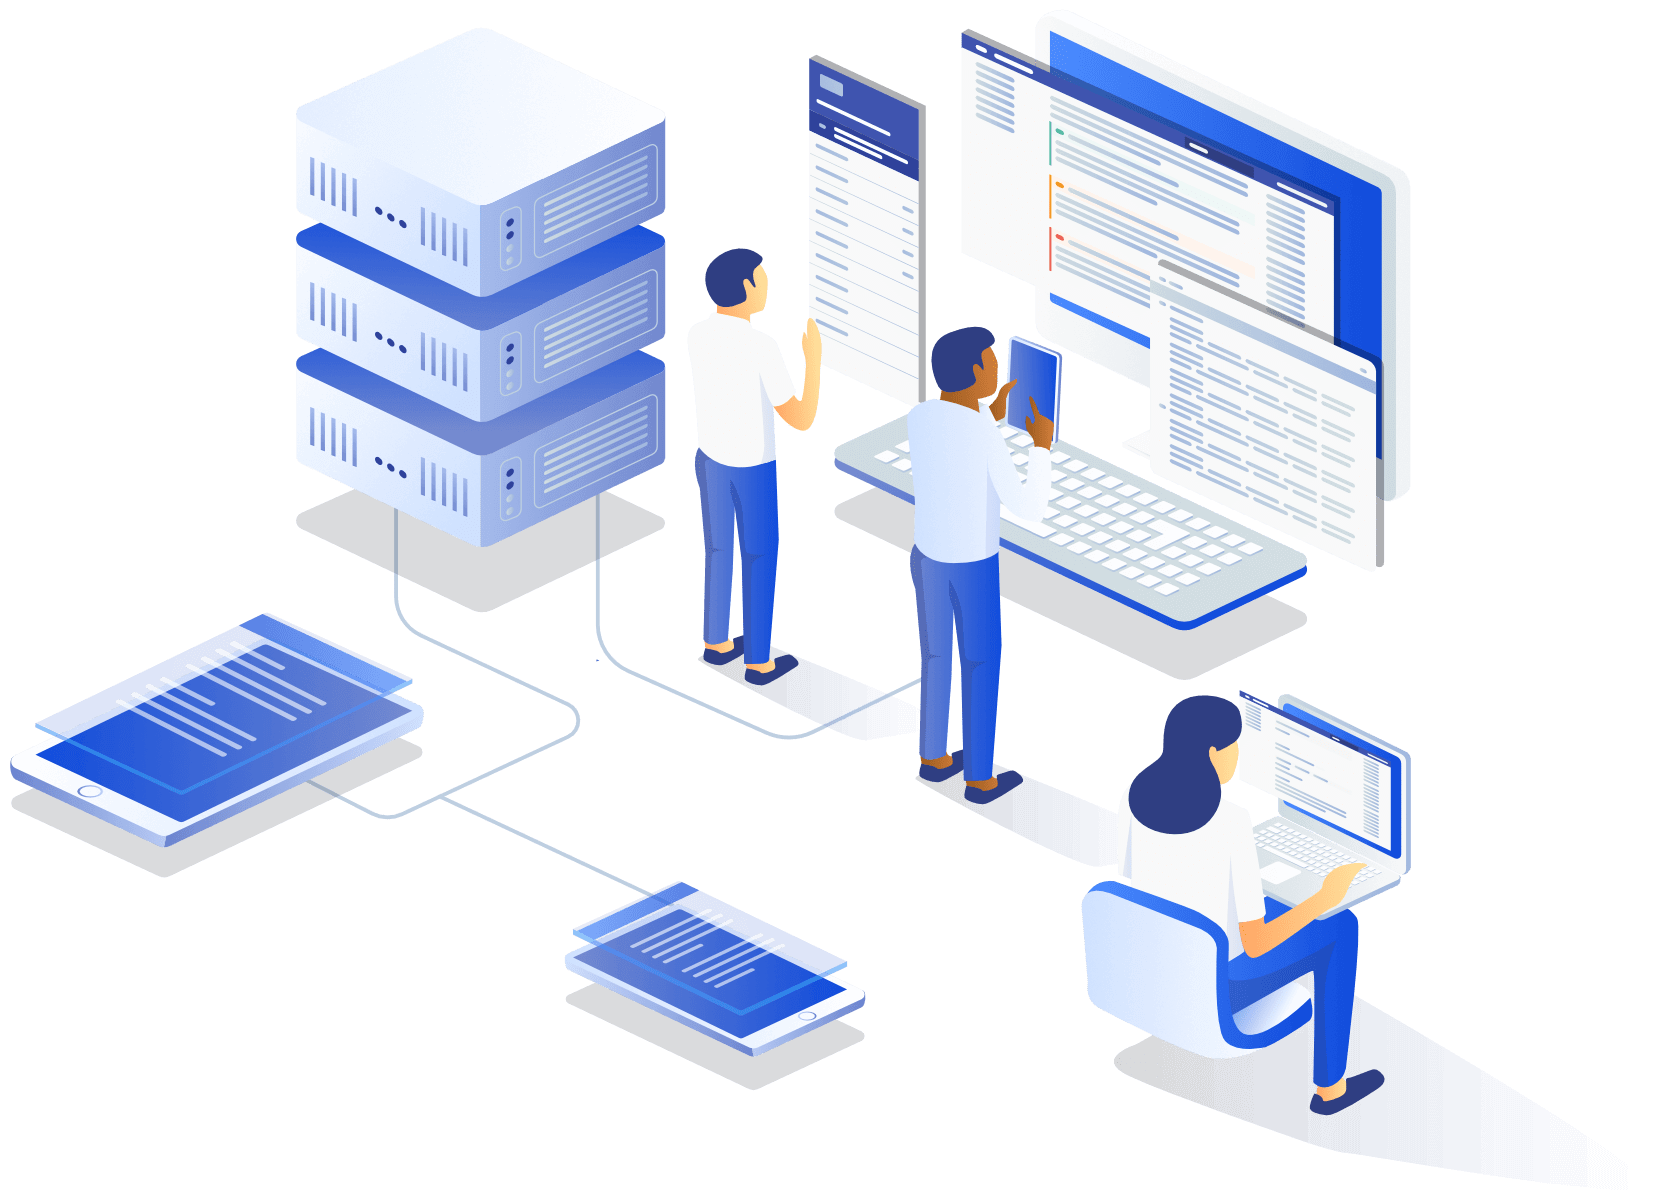 An illustration of a team reviewing the data from multiple interconnected systems